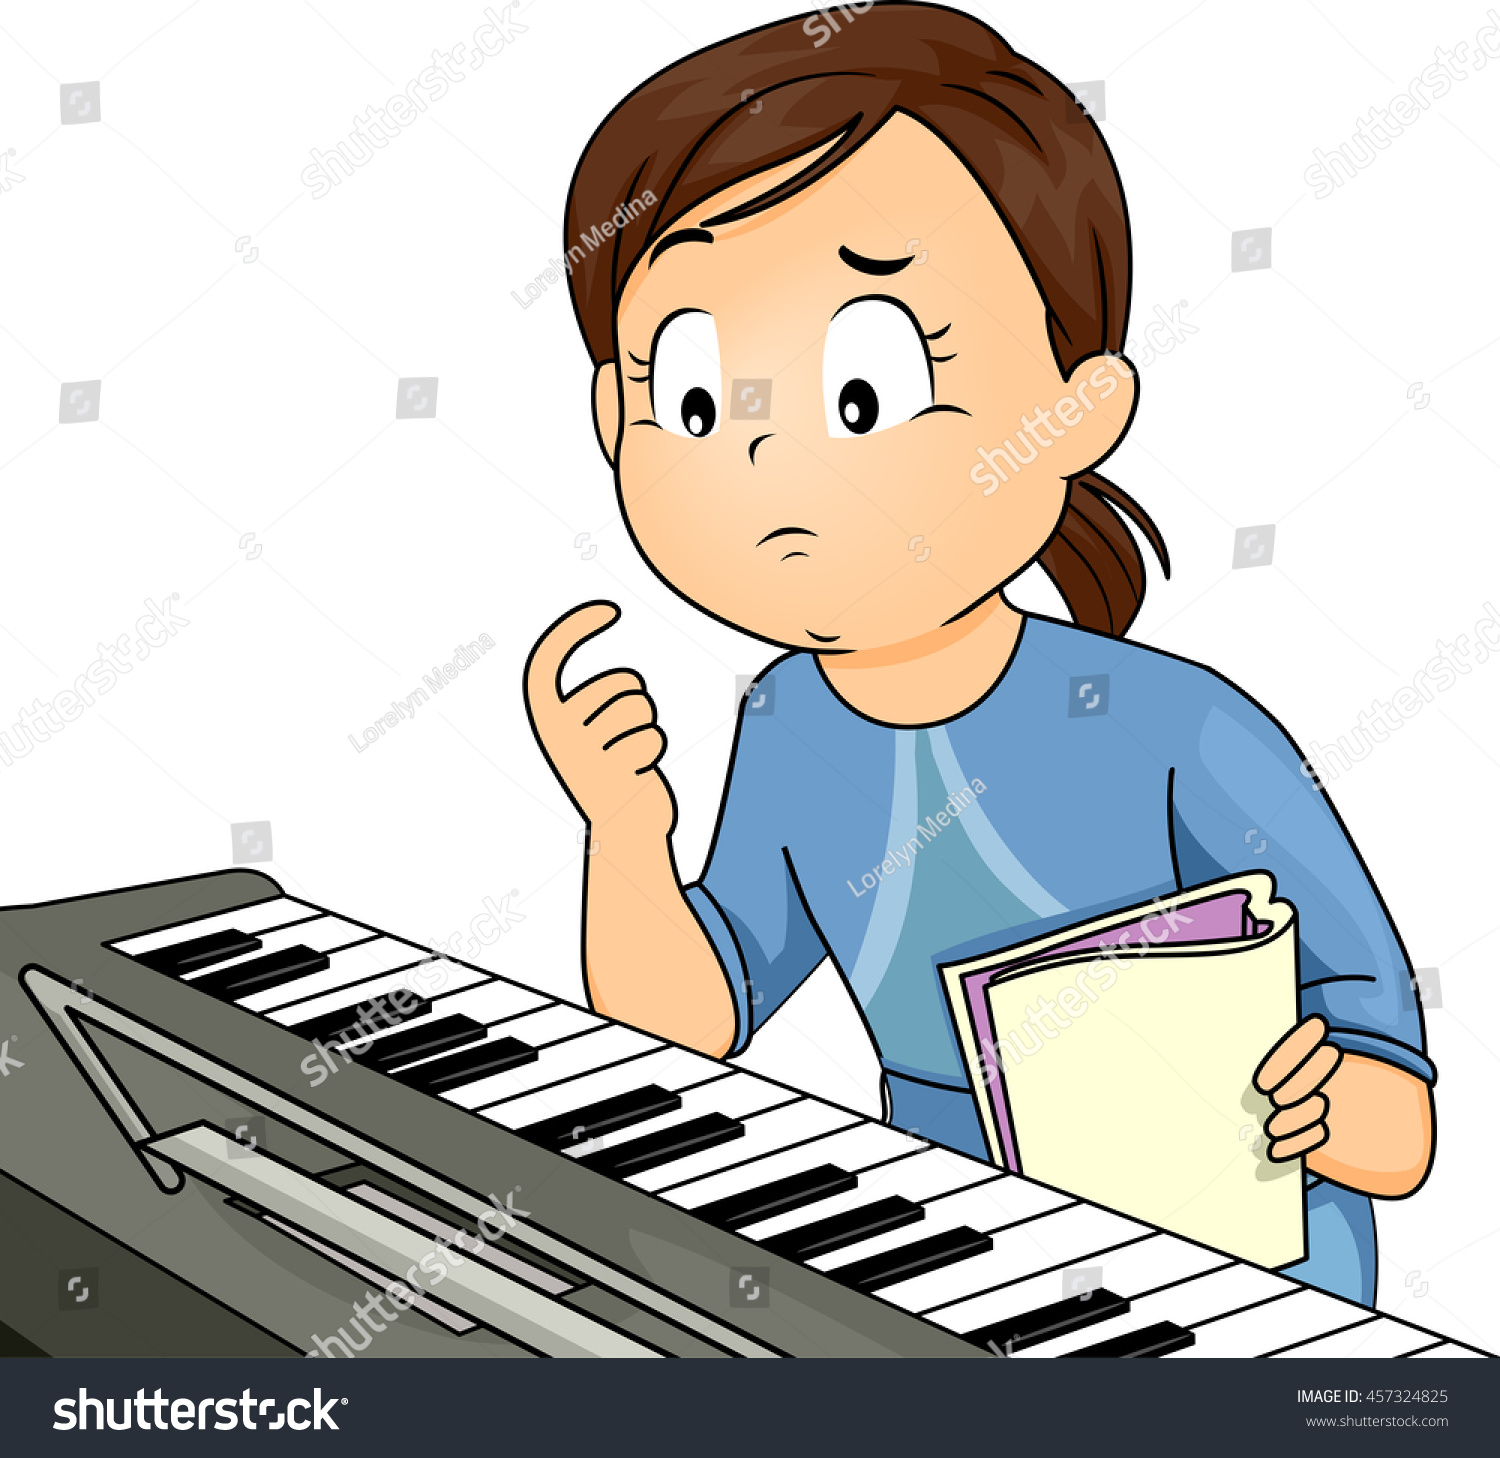 Does he play the piano. Пианист мультяшное. Пианист мультяшная. Пианист мультяшный. Мальчик пианист мультяшный.